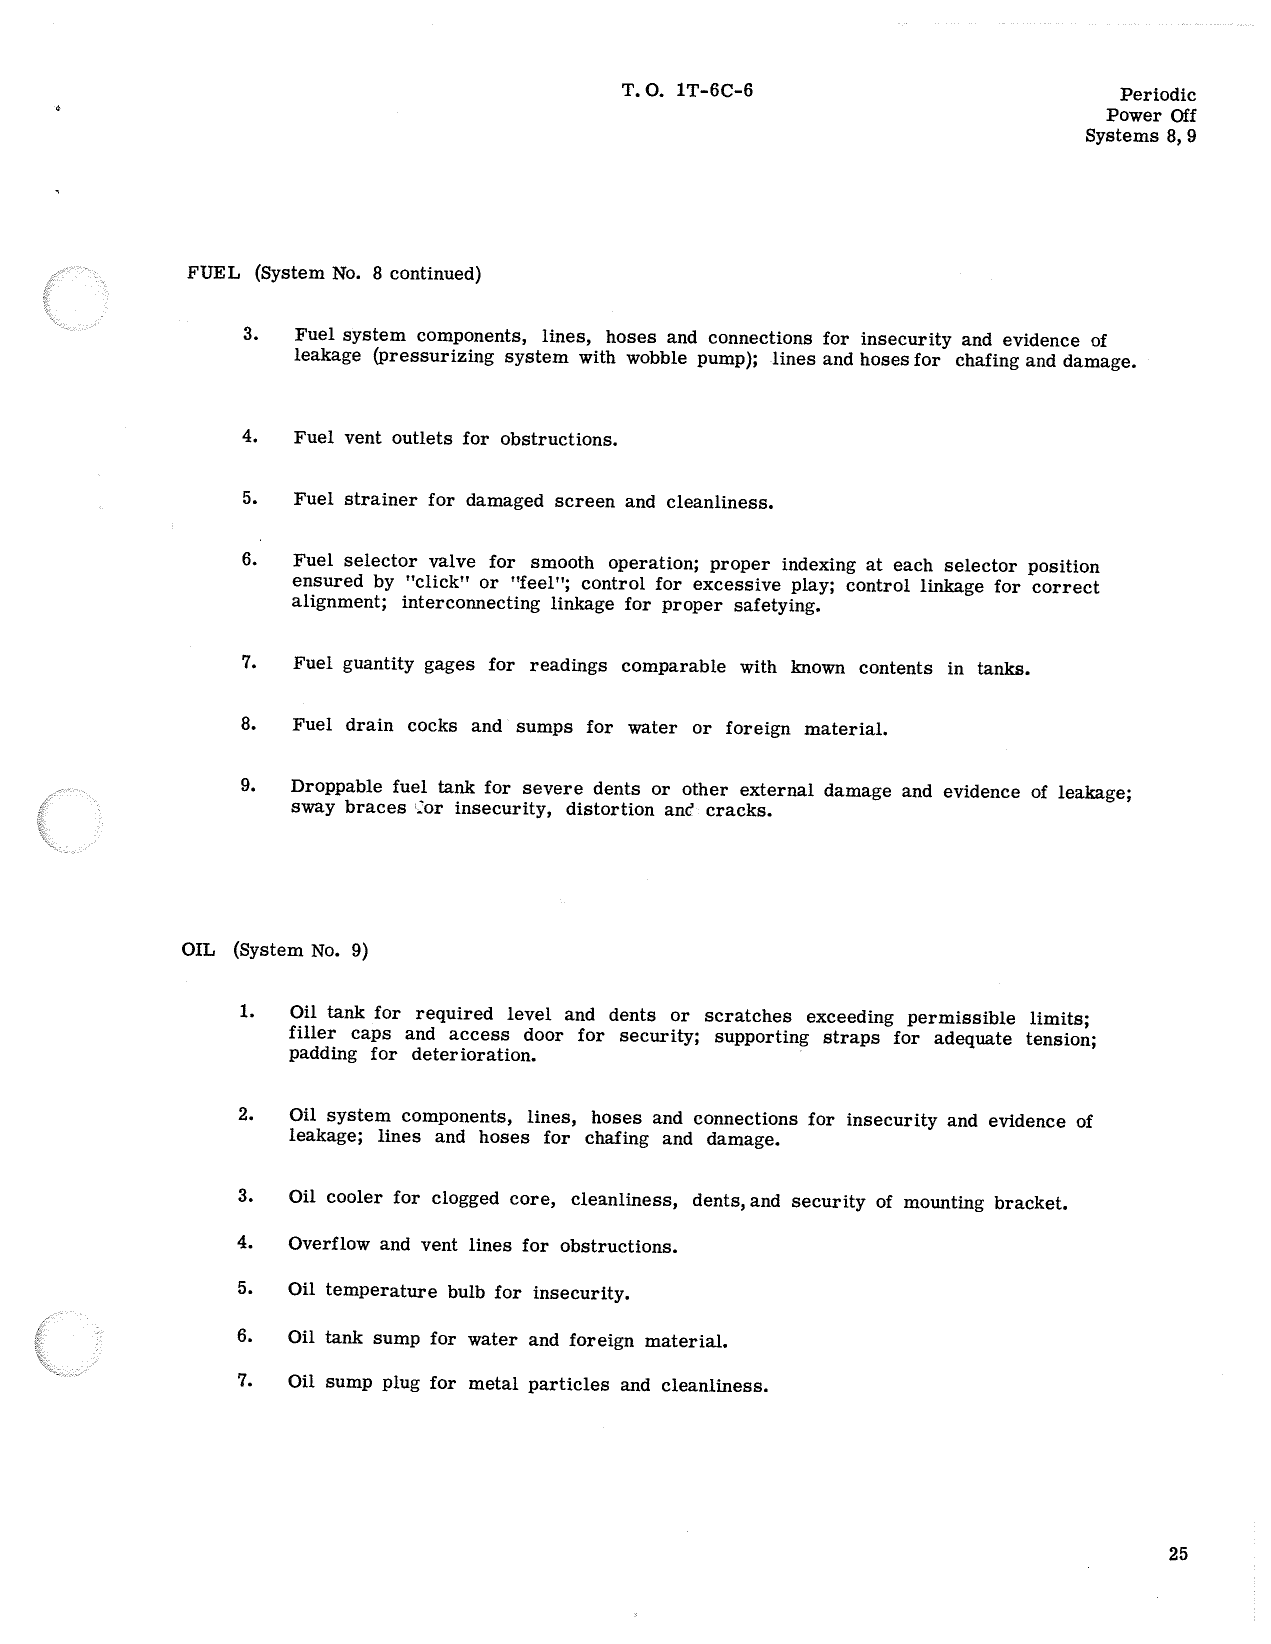 Sample page 87 from AirCorps Library document: Inspection Requirements T-6